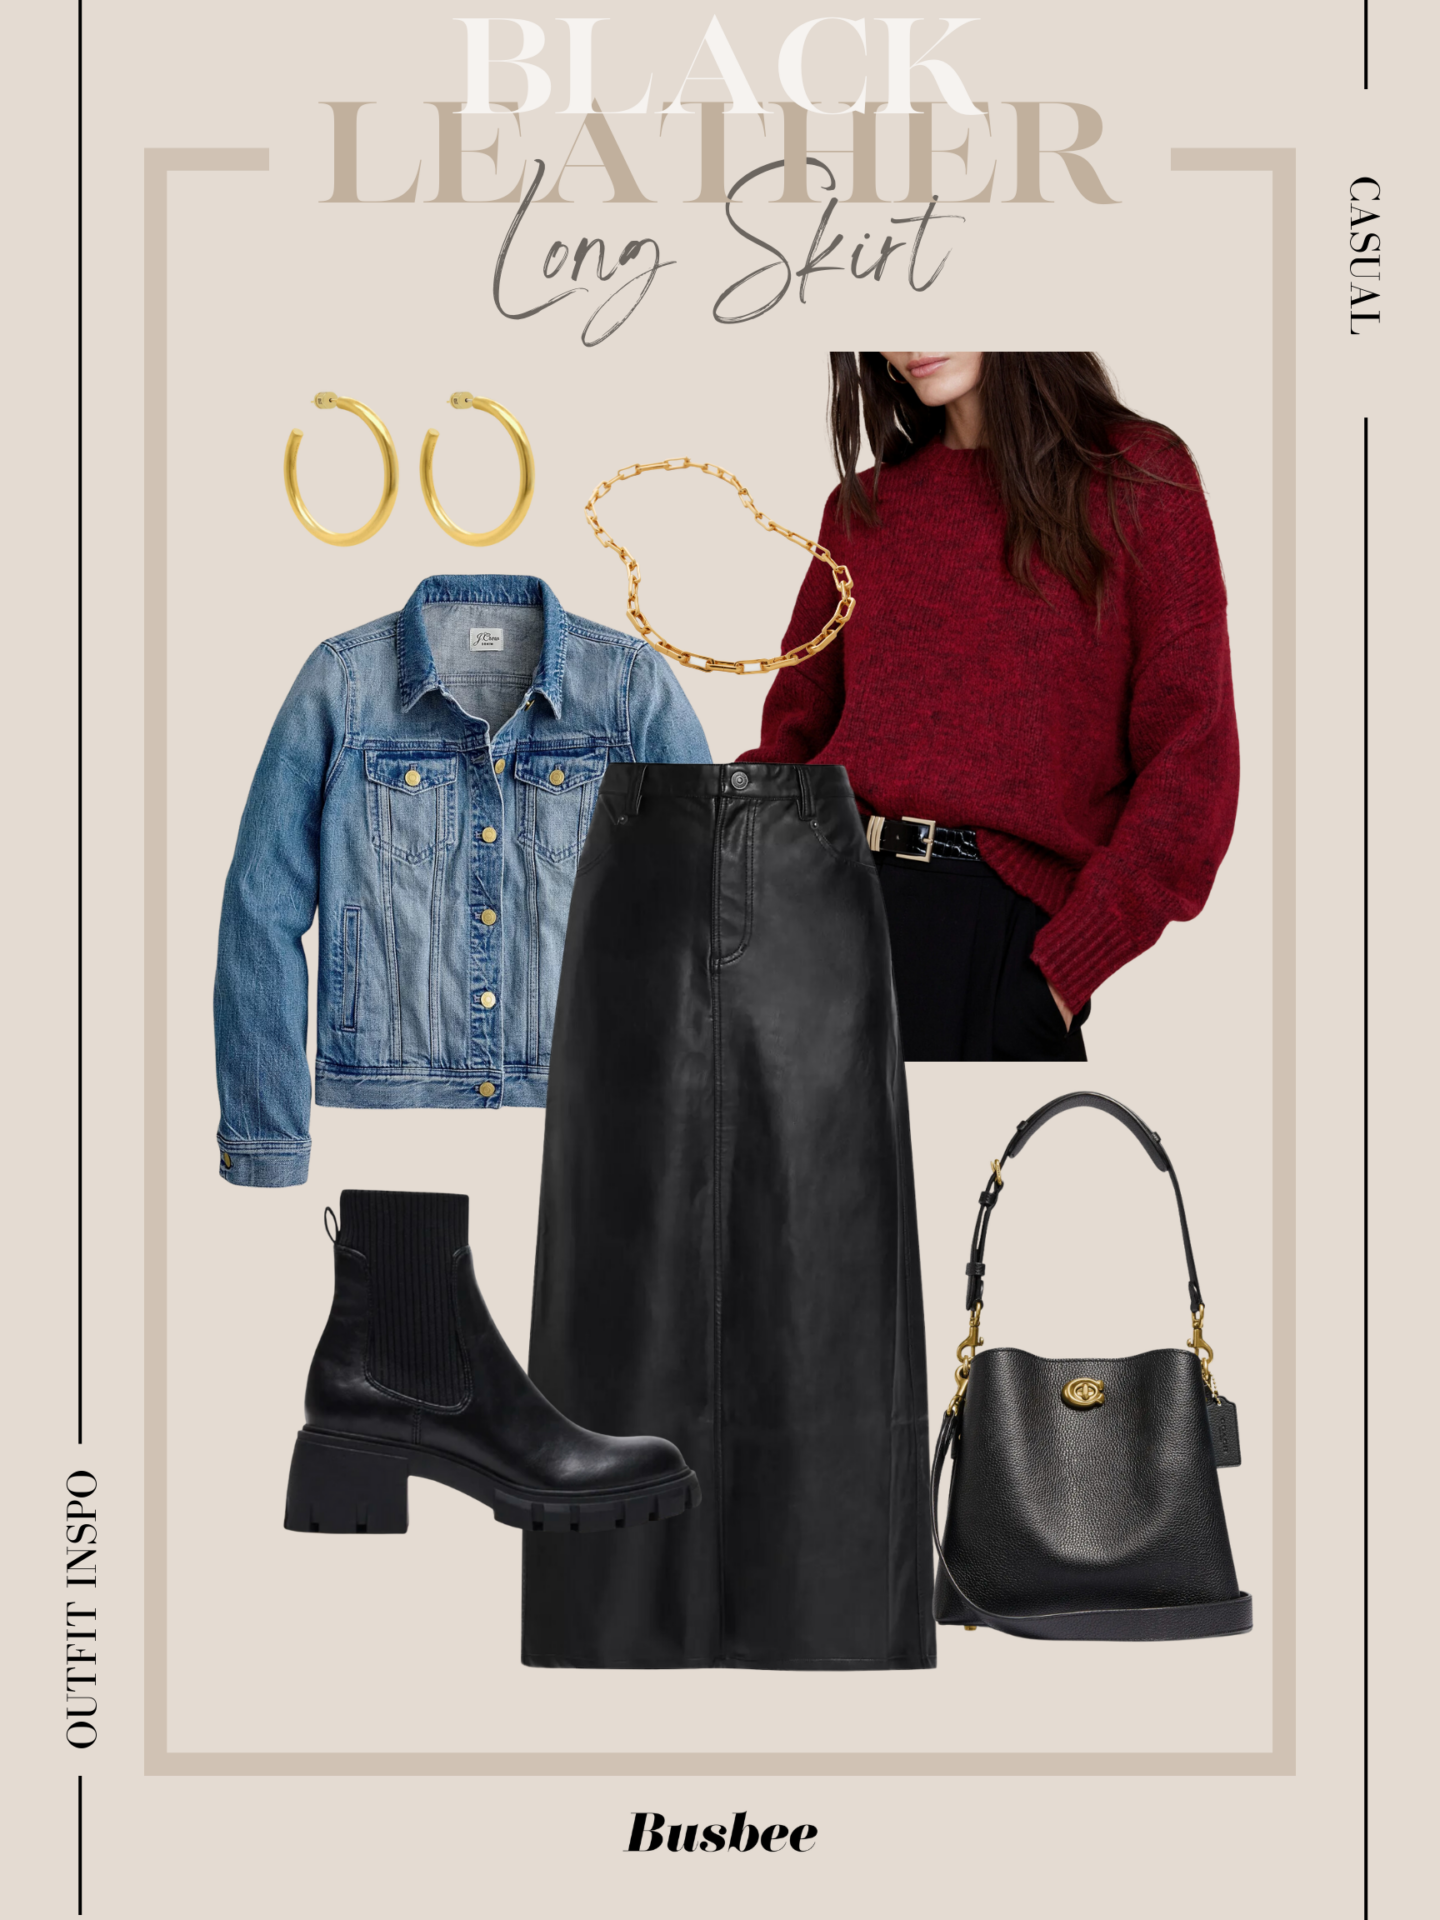 Leather Skirt Outfits for Every Season: Fall, Winter, Spring, and